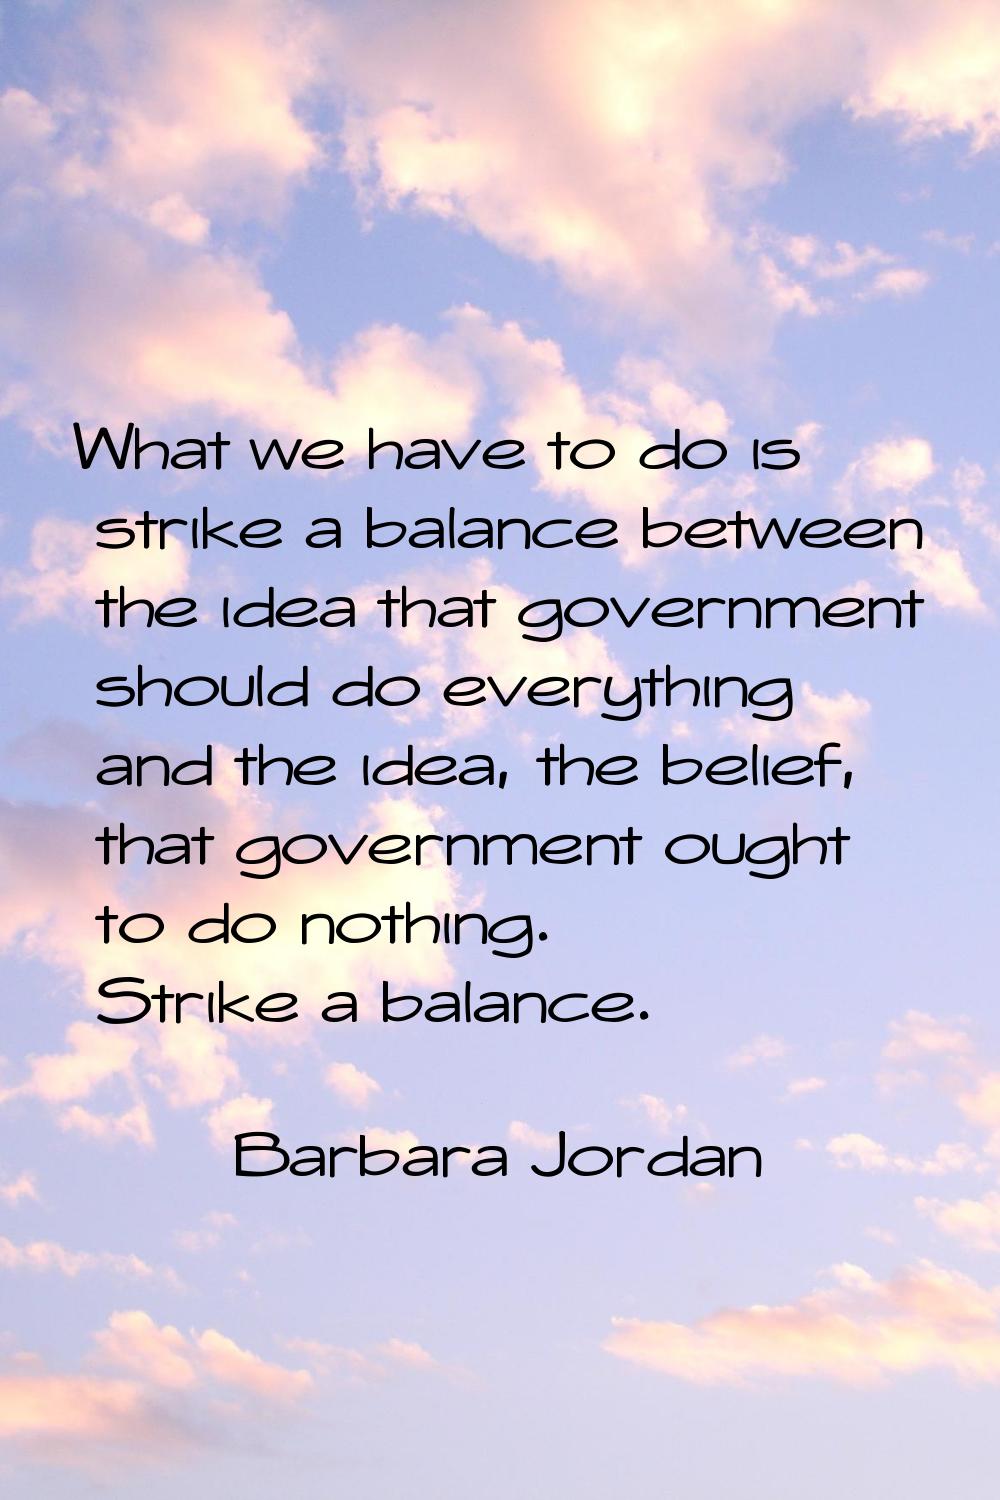 What we have to do is strike a balance between the idea that government should do everything and th